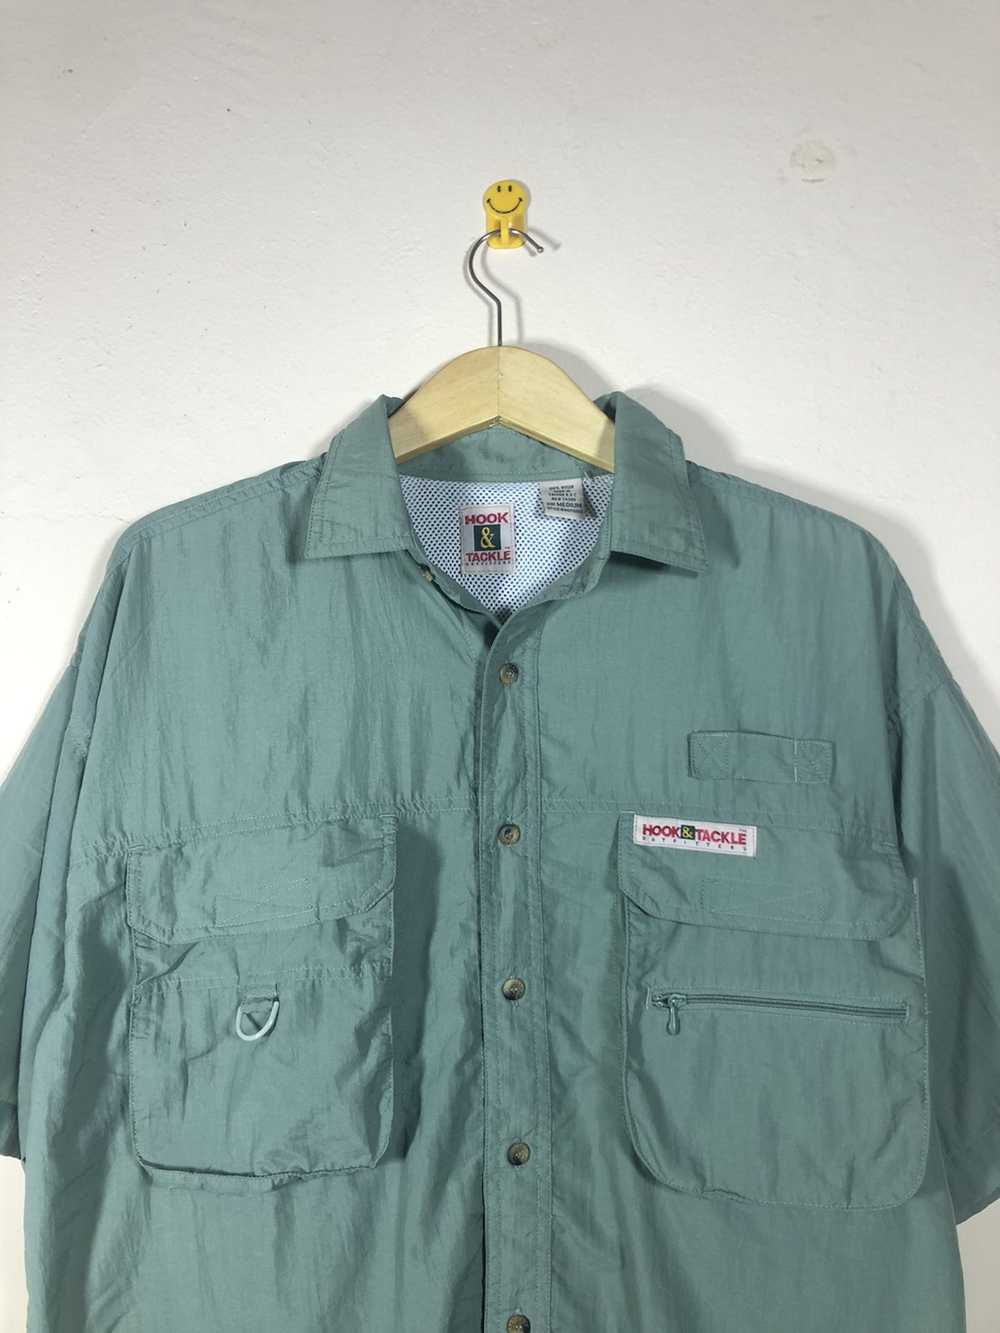 Japanese Brand Hook and tackle fishing shirt butt… - image 2